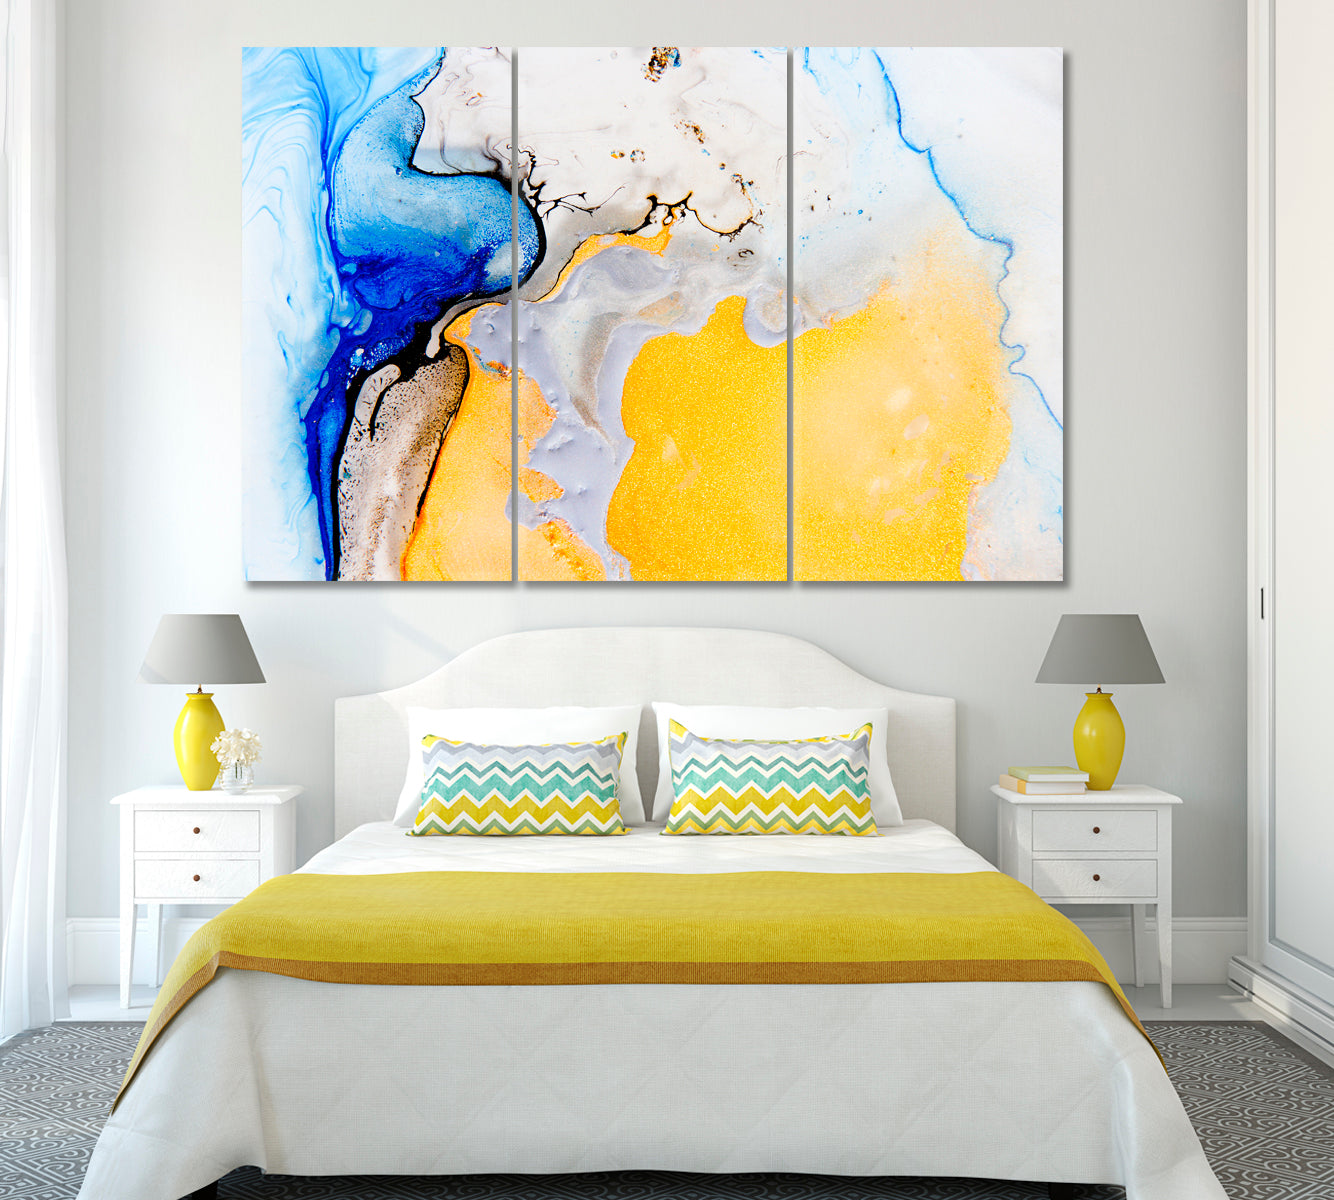 Abstract Yellow and Blue Mixed Acrylic Paints Canvas Print ArtLexy 3 Panels 36"x24" inches 